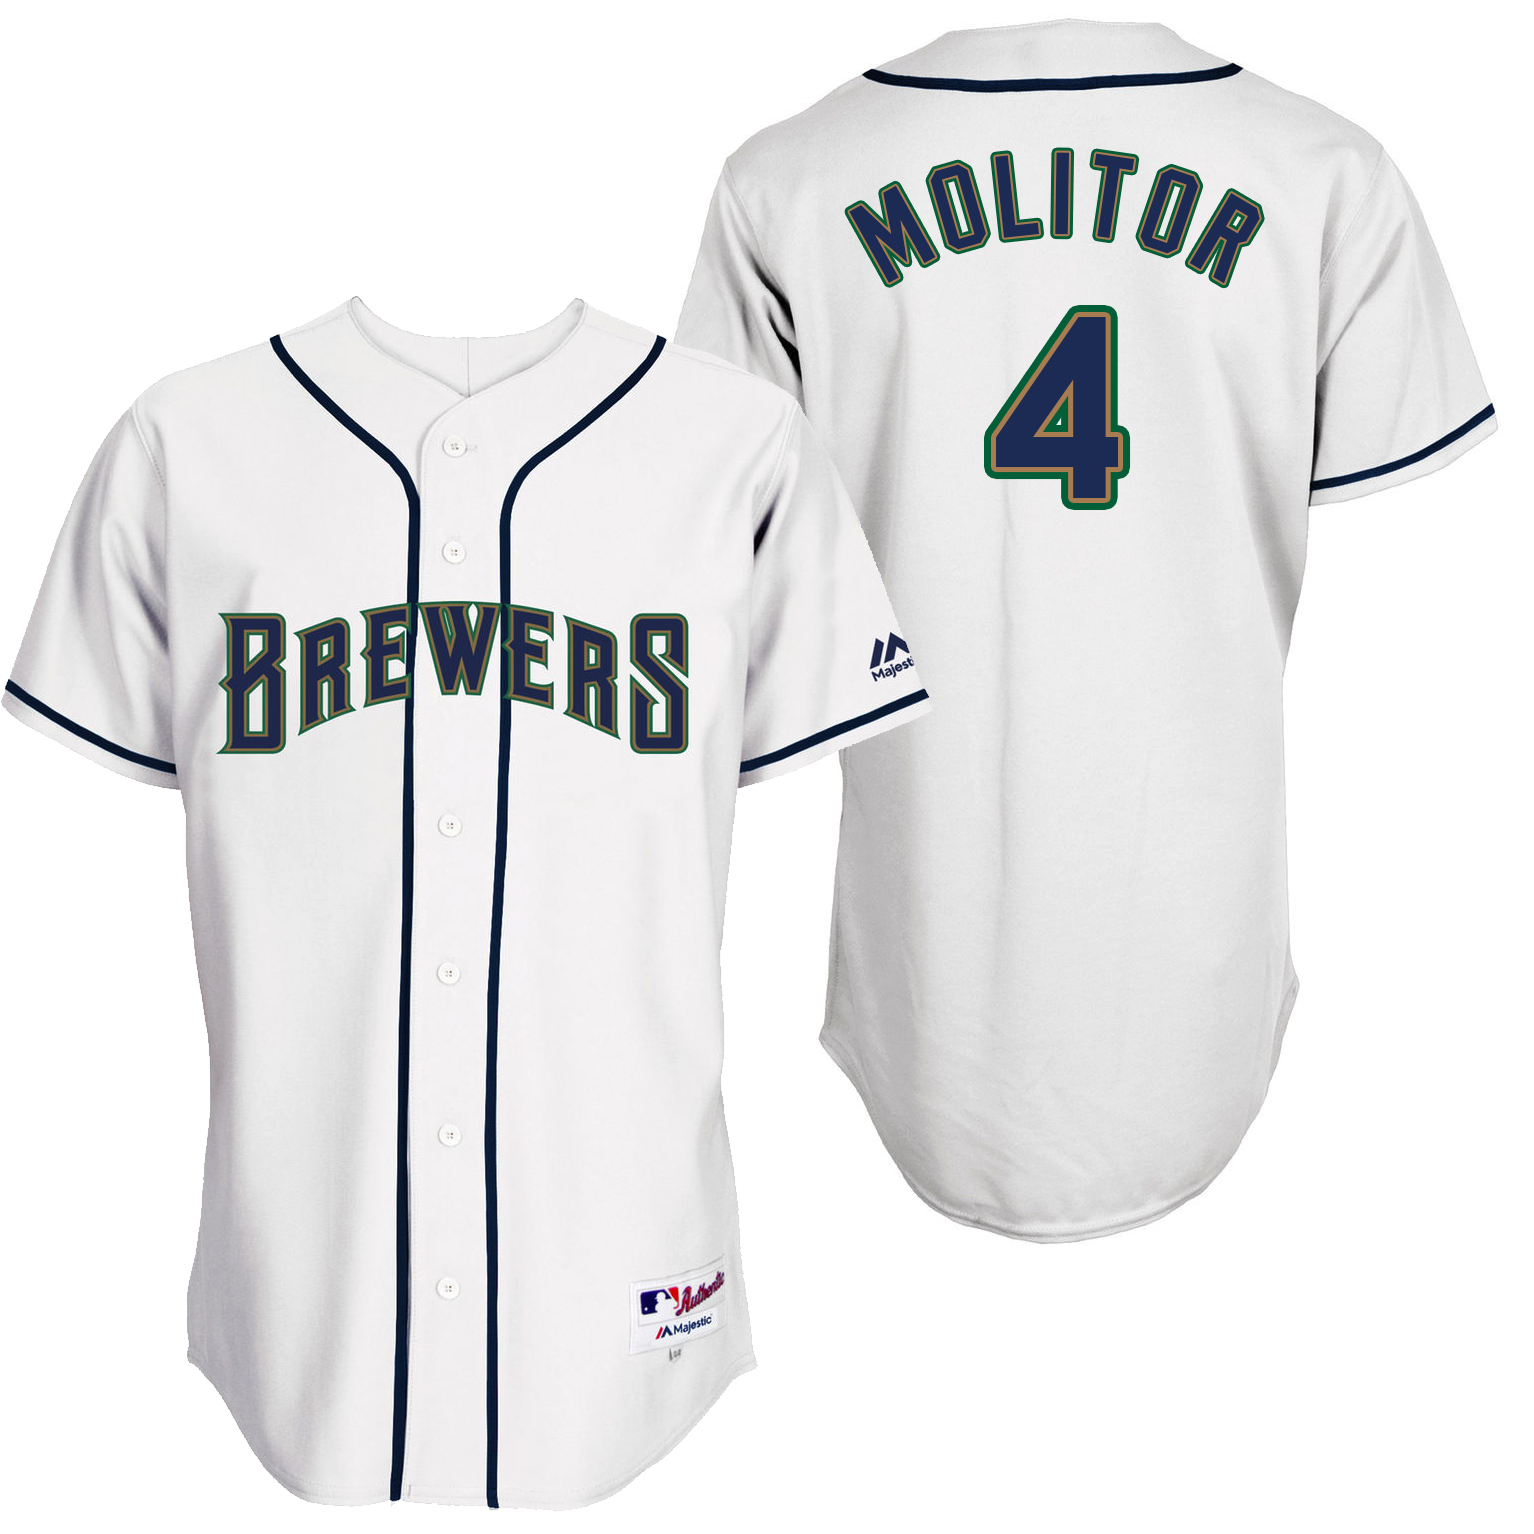 Brewers 4 Paul Molitor White Throwback Jersey - Click Image to Close